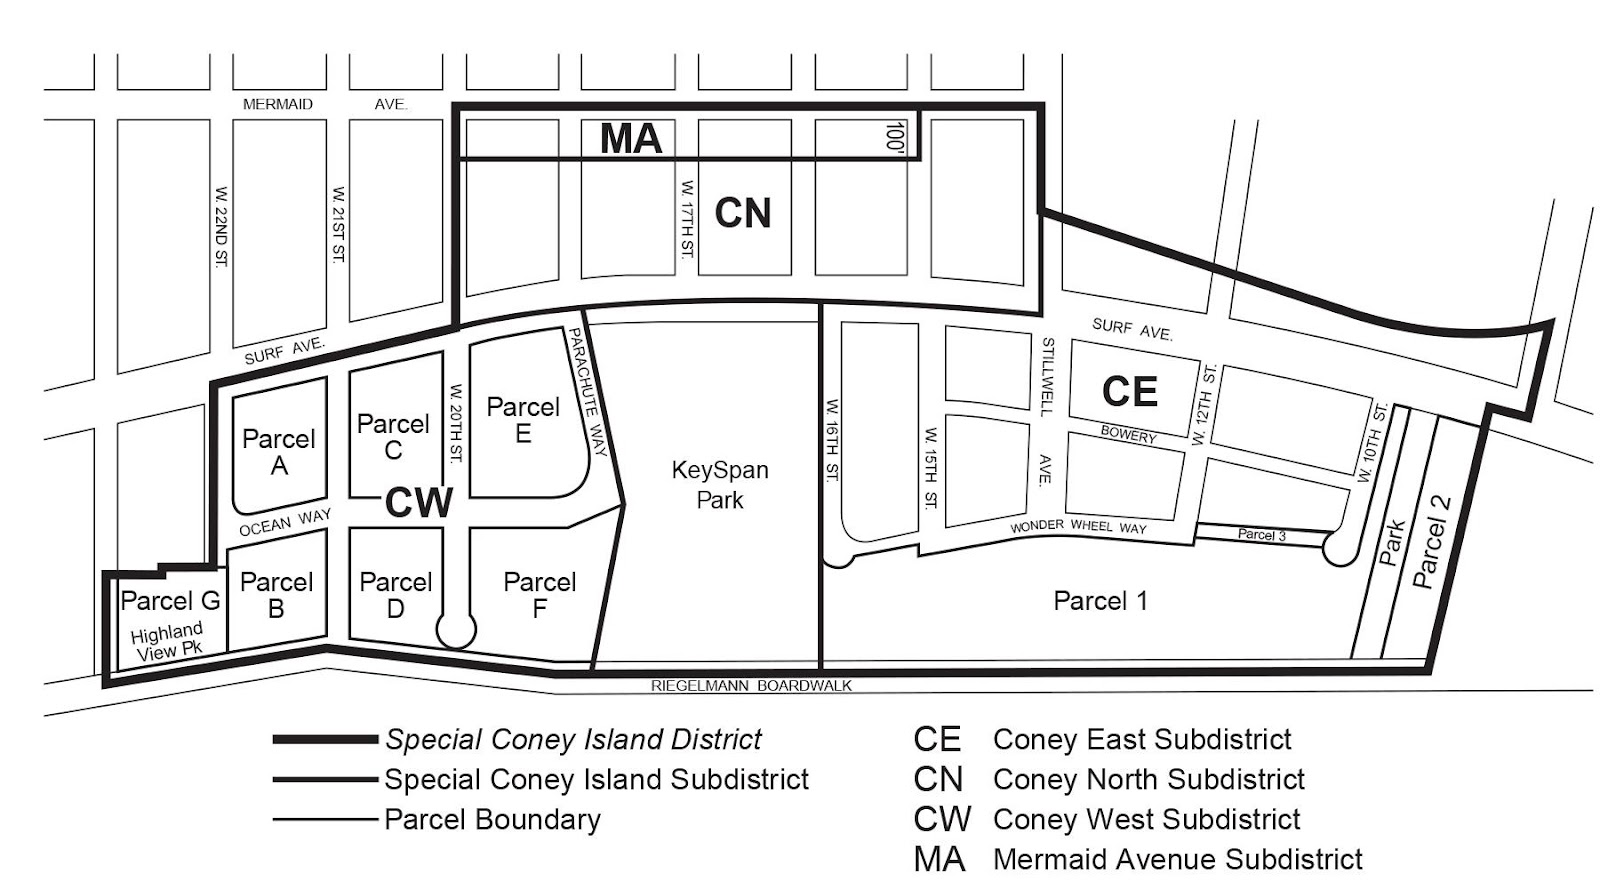 Zoning Resolutions Chapter 1: Special Coney Island District Appendix A.0